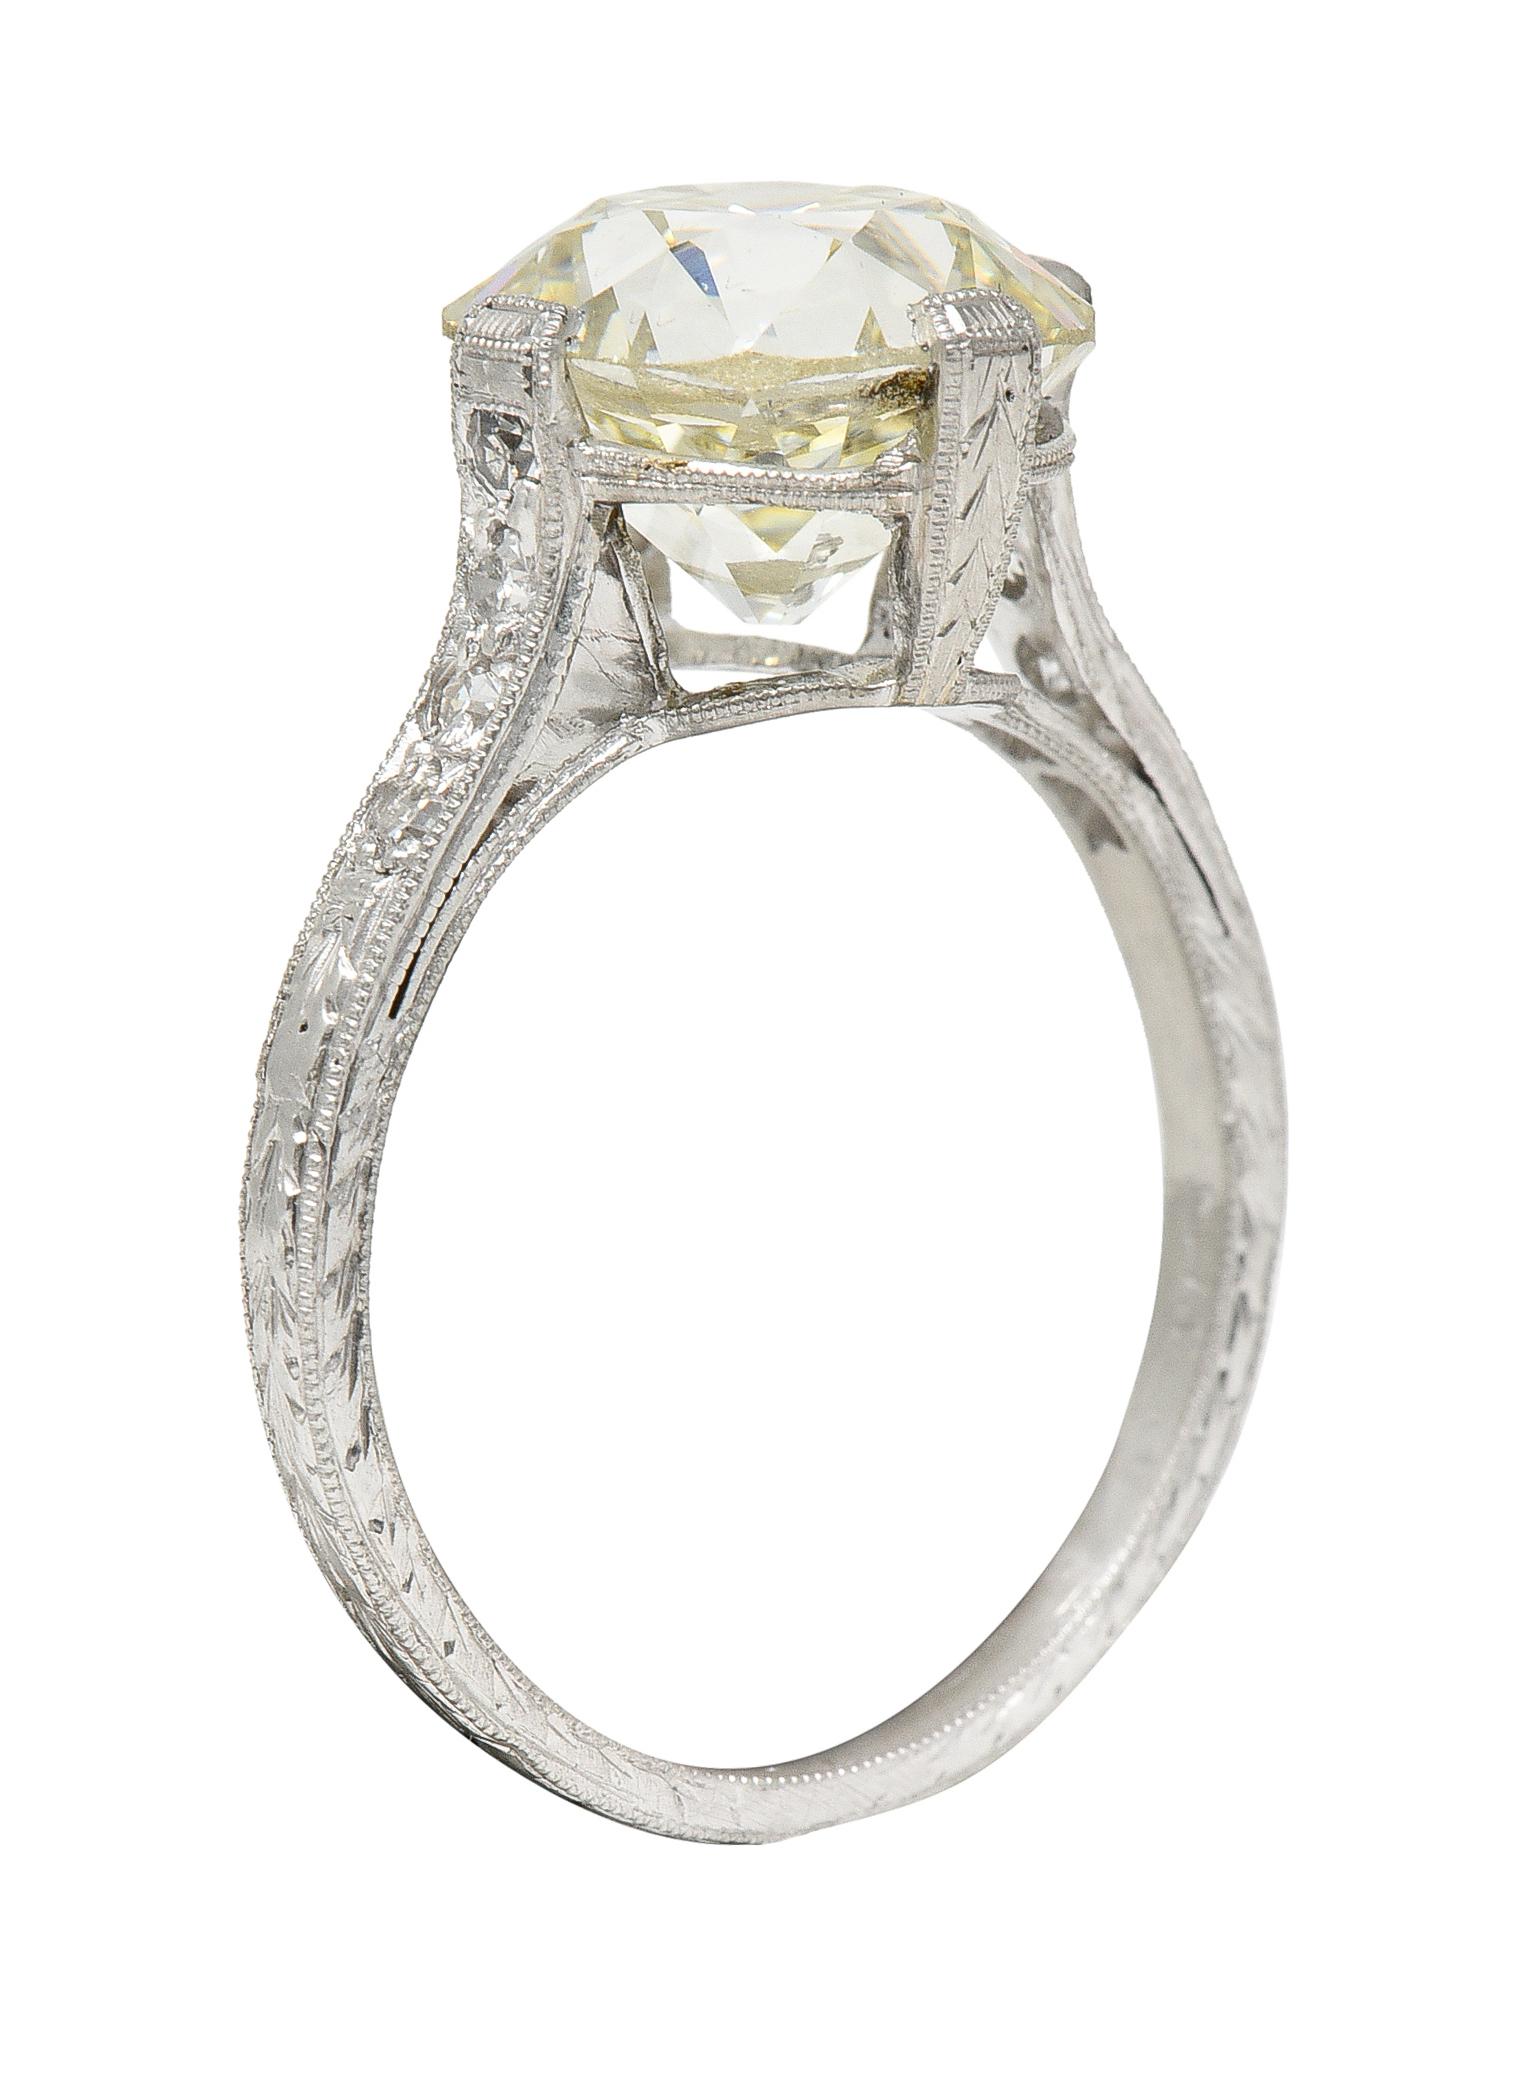 Centering an old European cut diamond weighing 3.44 carats - O/P color with VS2 clarity. Set with tab-like prongs in a decorously engraved wheat motif basket. Flanked by cathedral shoulders bead set with single cut diamonds. Weighing approximately